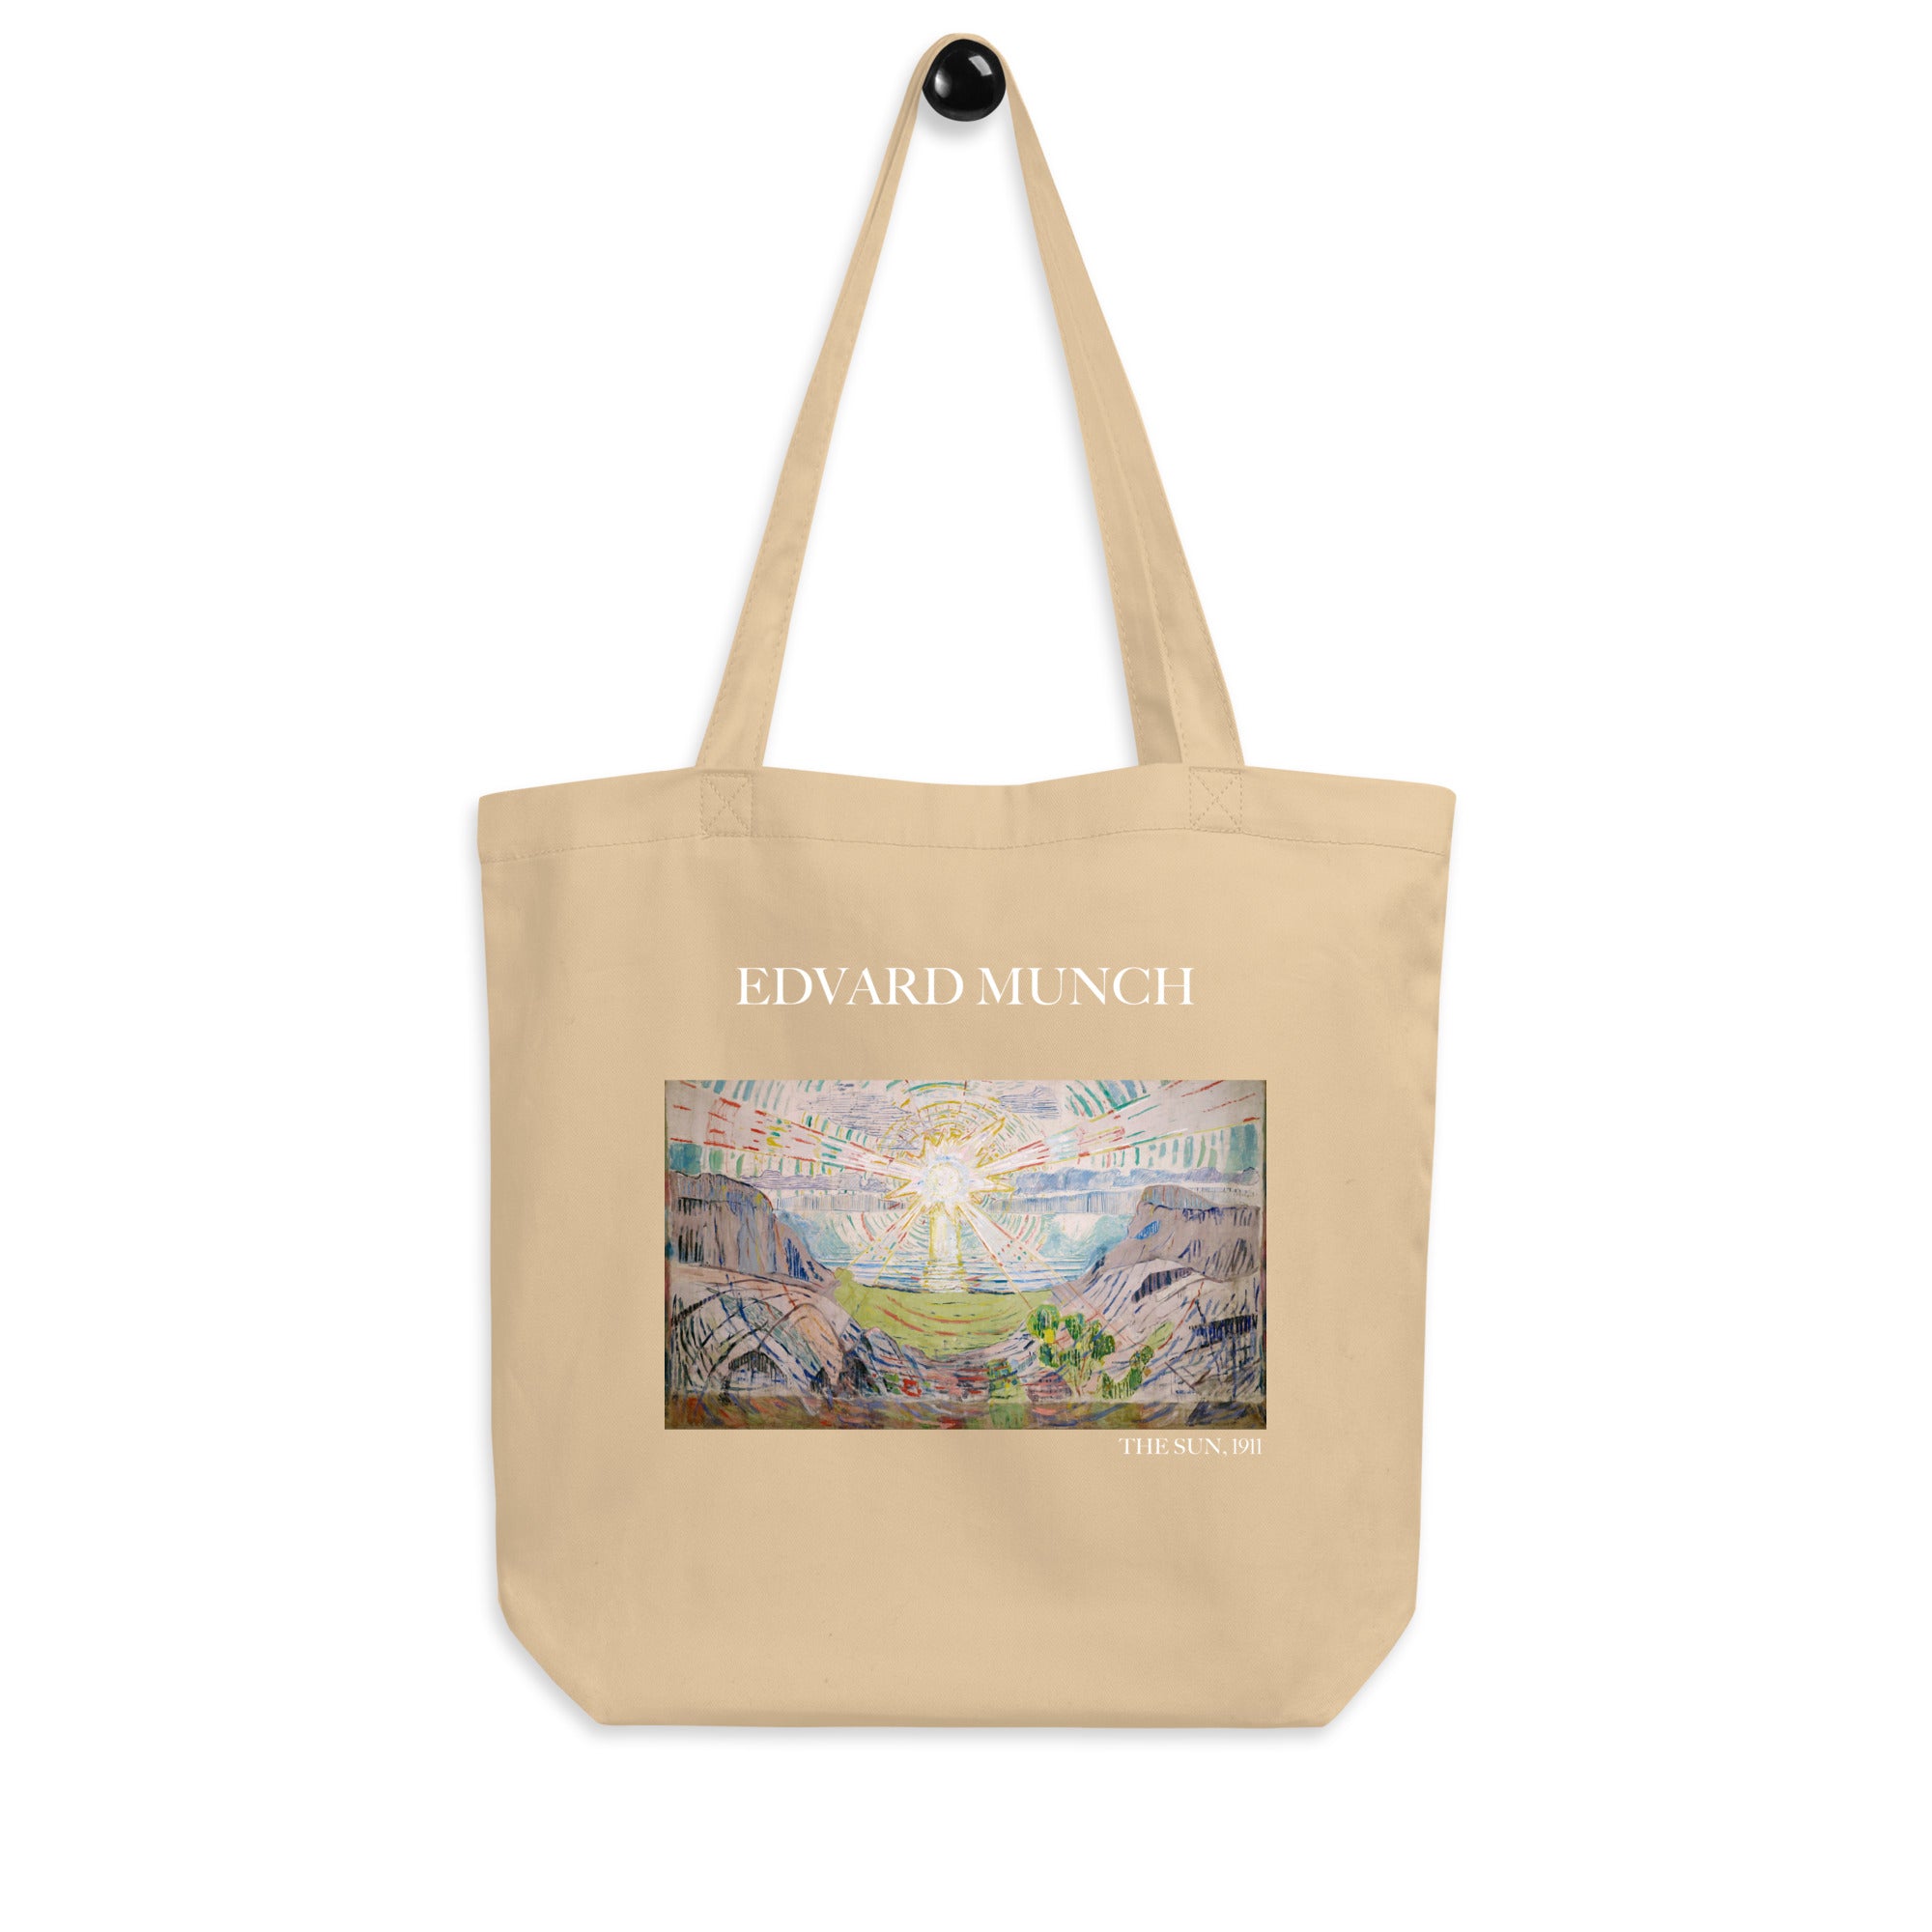 Edvard Munch 'The Sun' Famous Painting Totebag | Eco Friendly Art Tote Bag